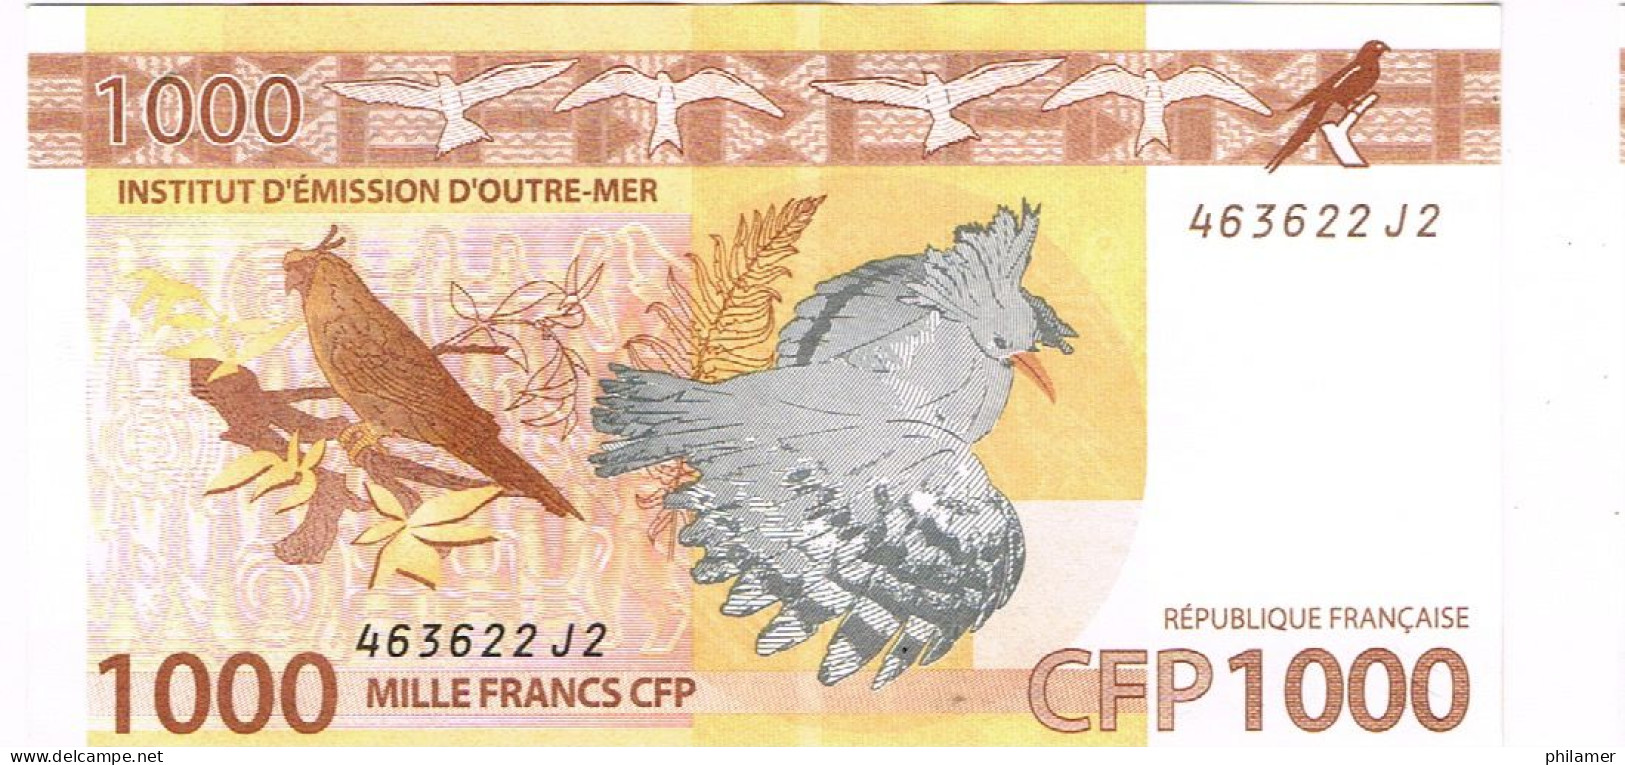 J2 Nouvelle Caledonie Caledonia Billet Banque Monnaie Banknote IEOM 1000 F Cagou Perruche Tortue Turtle Mint UNC - French Pacific Territories (1992-...)